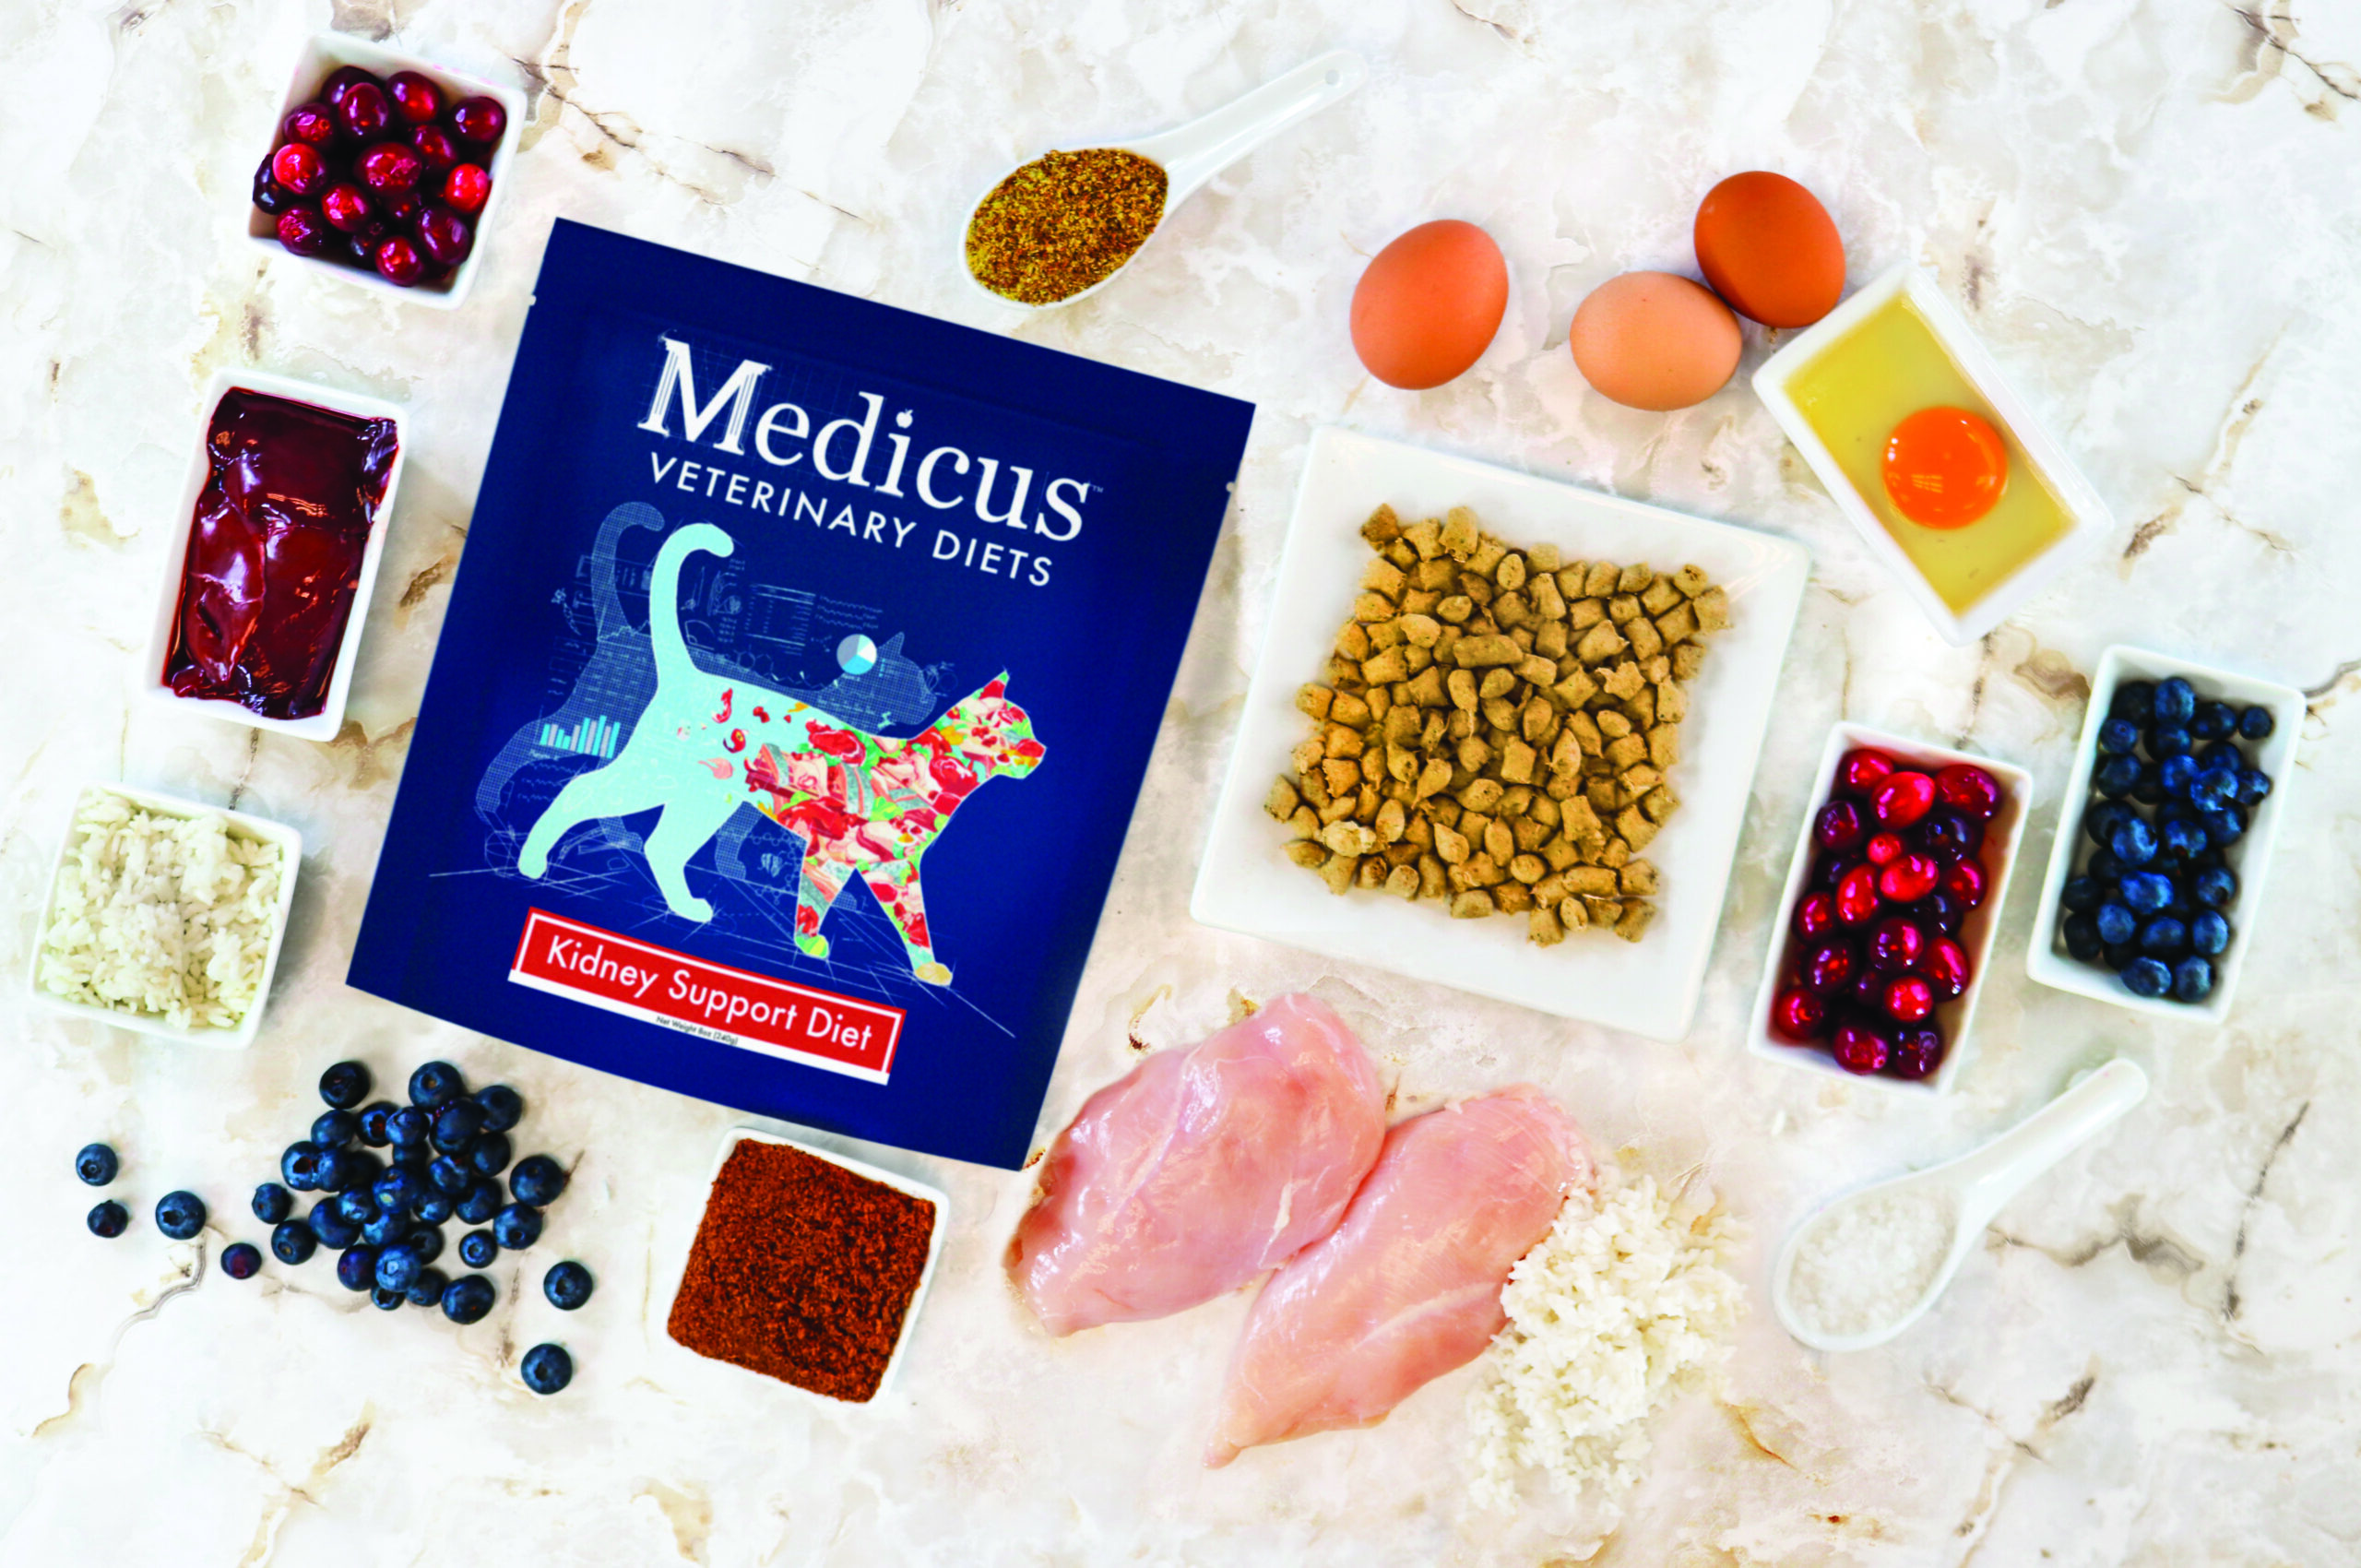 NEW LIFESTYLE IMAGE - Cat - kidney support - Medicus ingredient collage edits